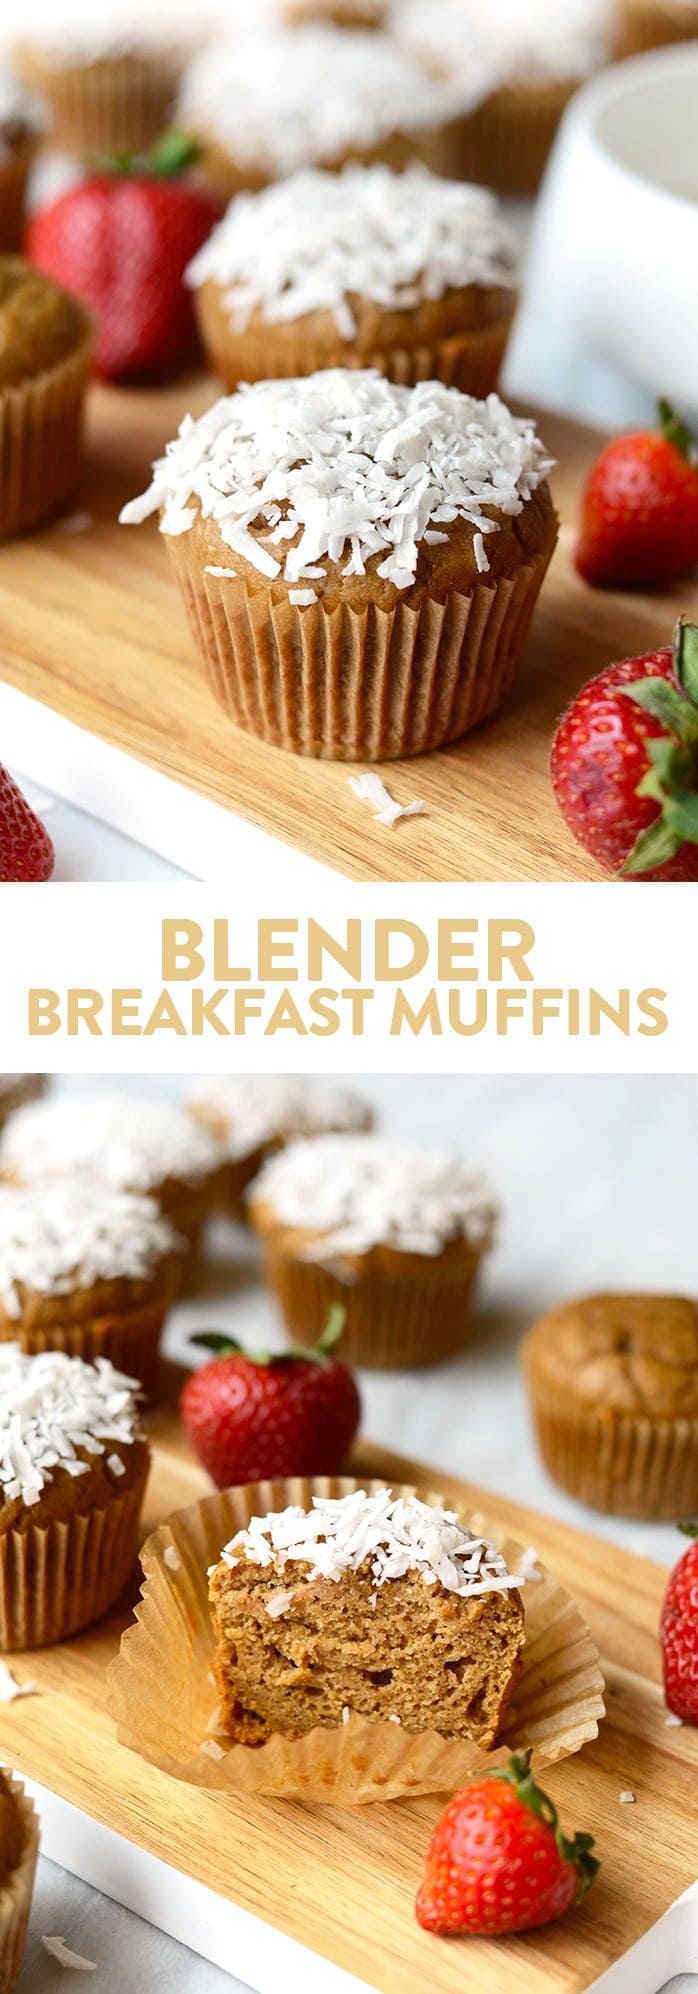 These delicious whole grain blender breakfast muffins are made with pureed strawberries and bananas and 100% white whole wheat flour for a healthy on-the-go breakfast. 